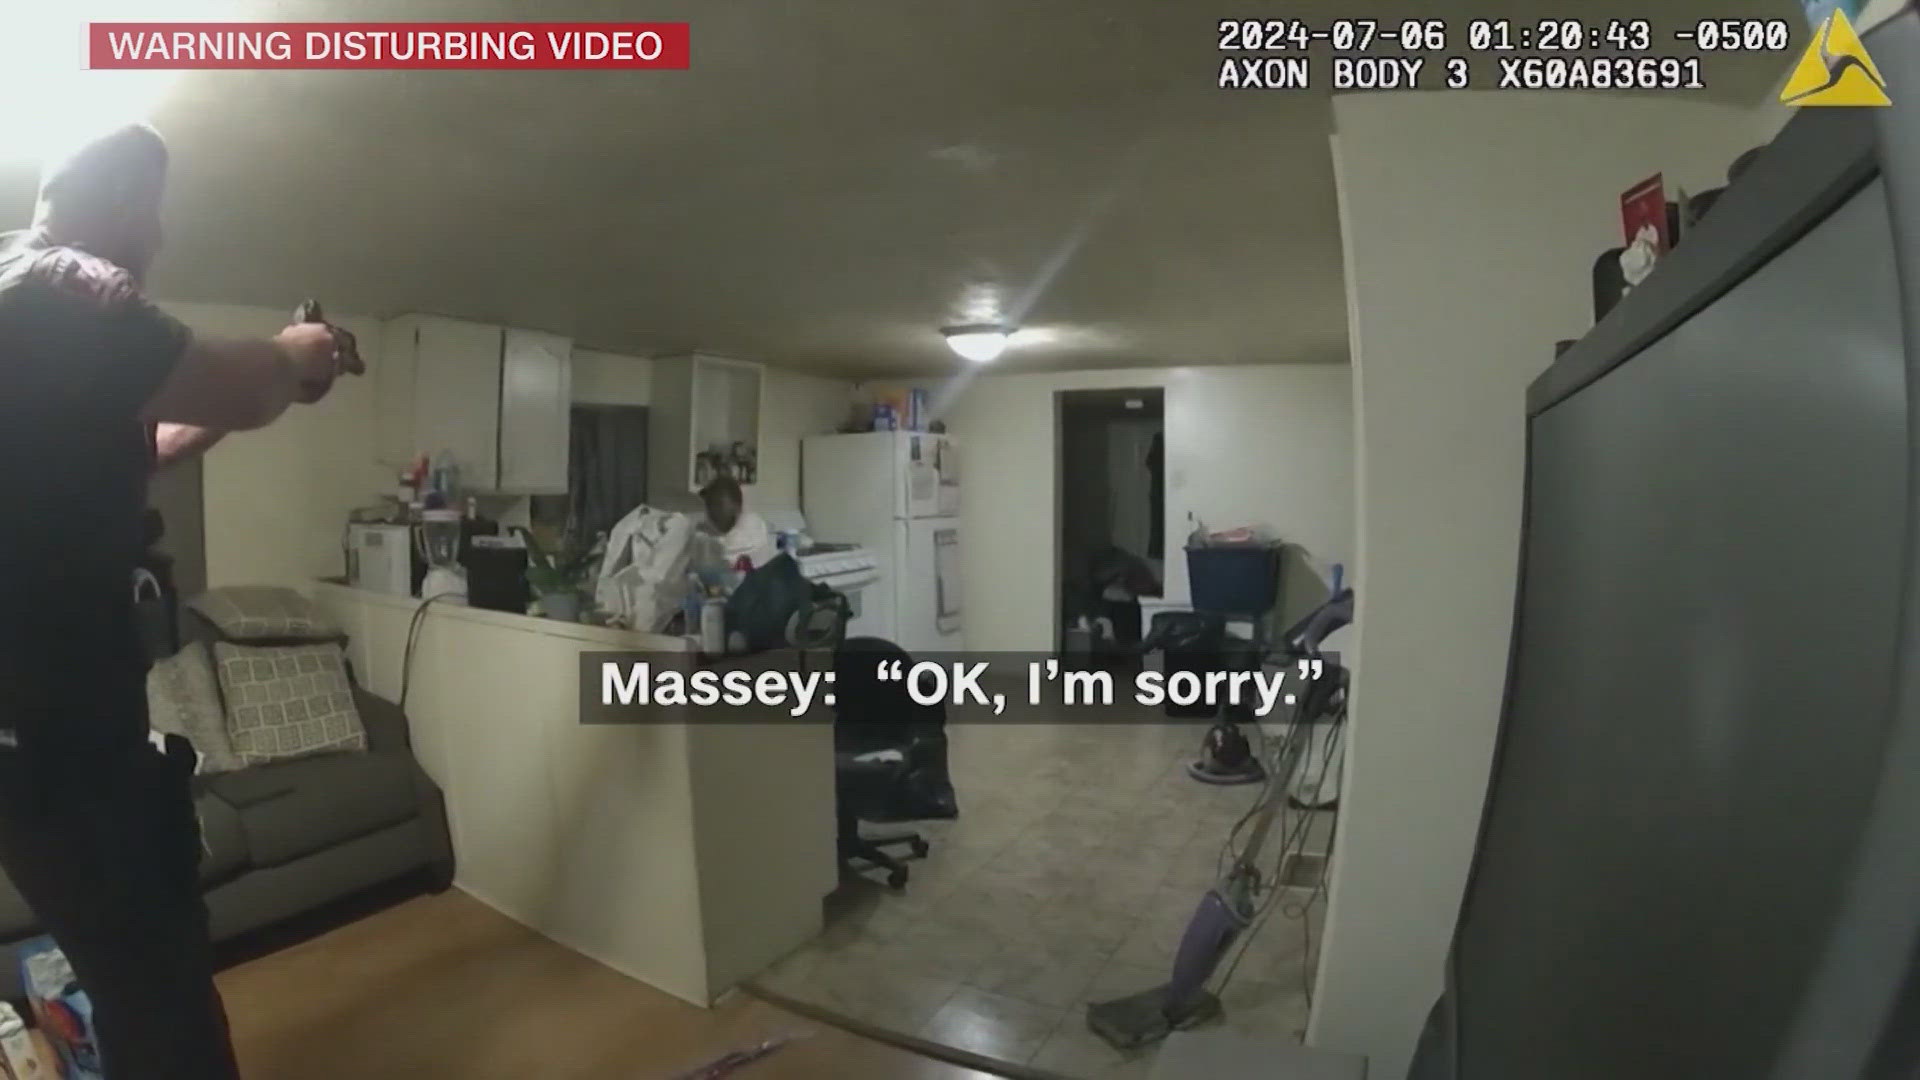 Shocking Video Reveals Fatal Police Shooting: Community Reacts with Outrage